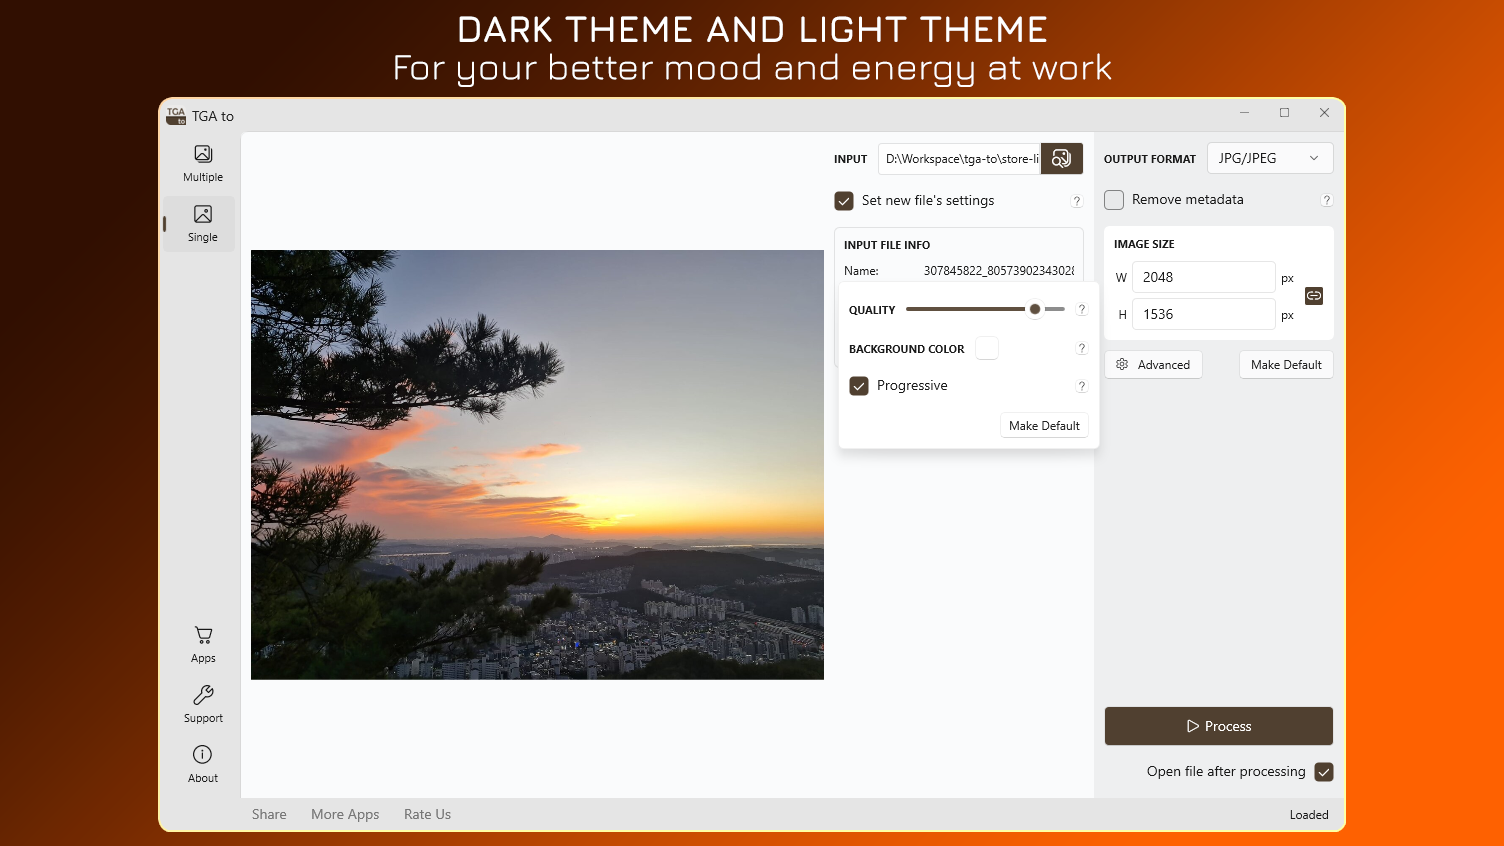 Dark Them and Light Theme - For your better mood and energy at work.